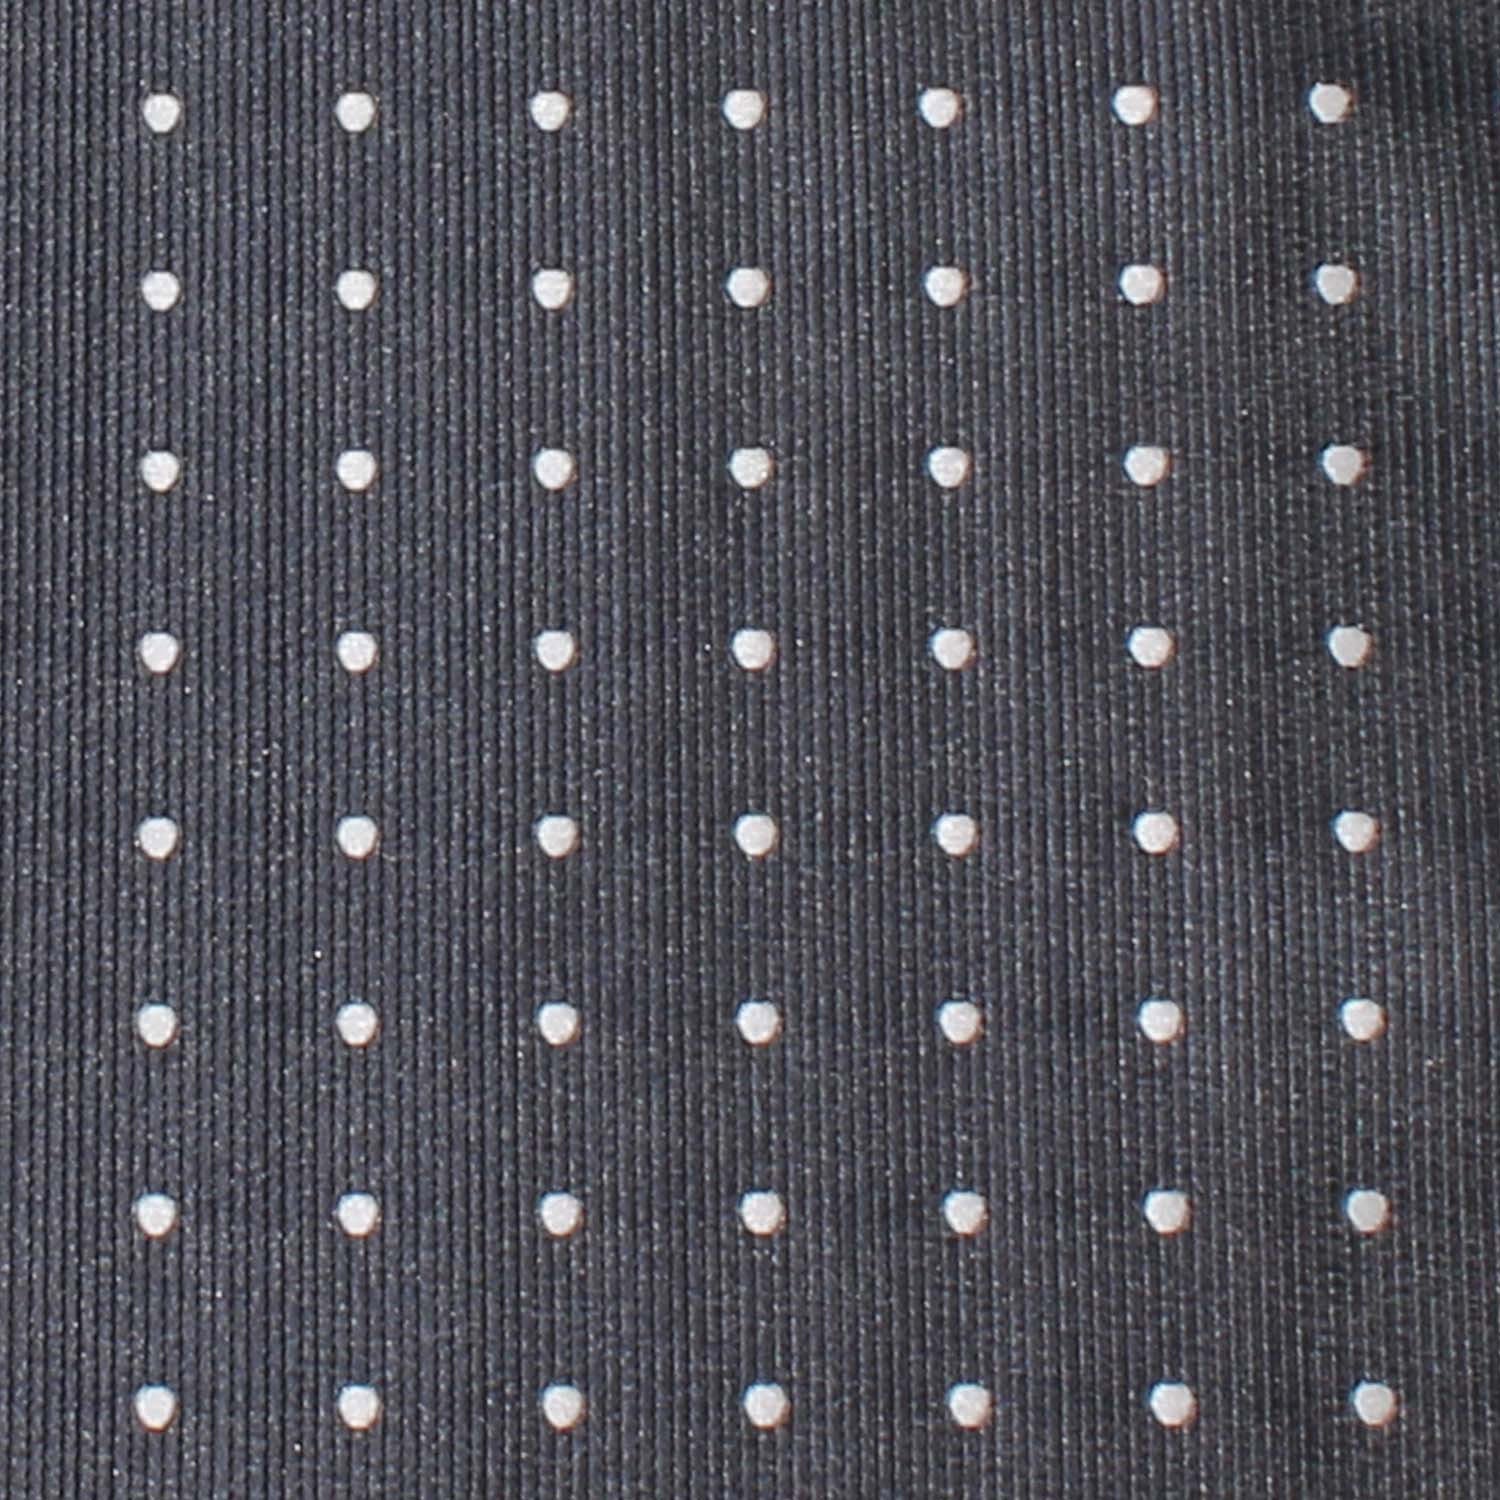 Charcoal Grey with White Polka Dots Fabric Bow Tie M121